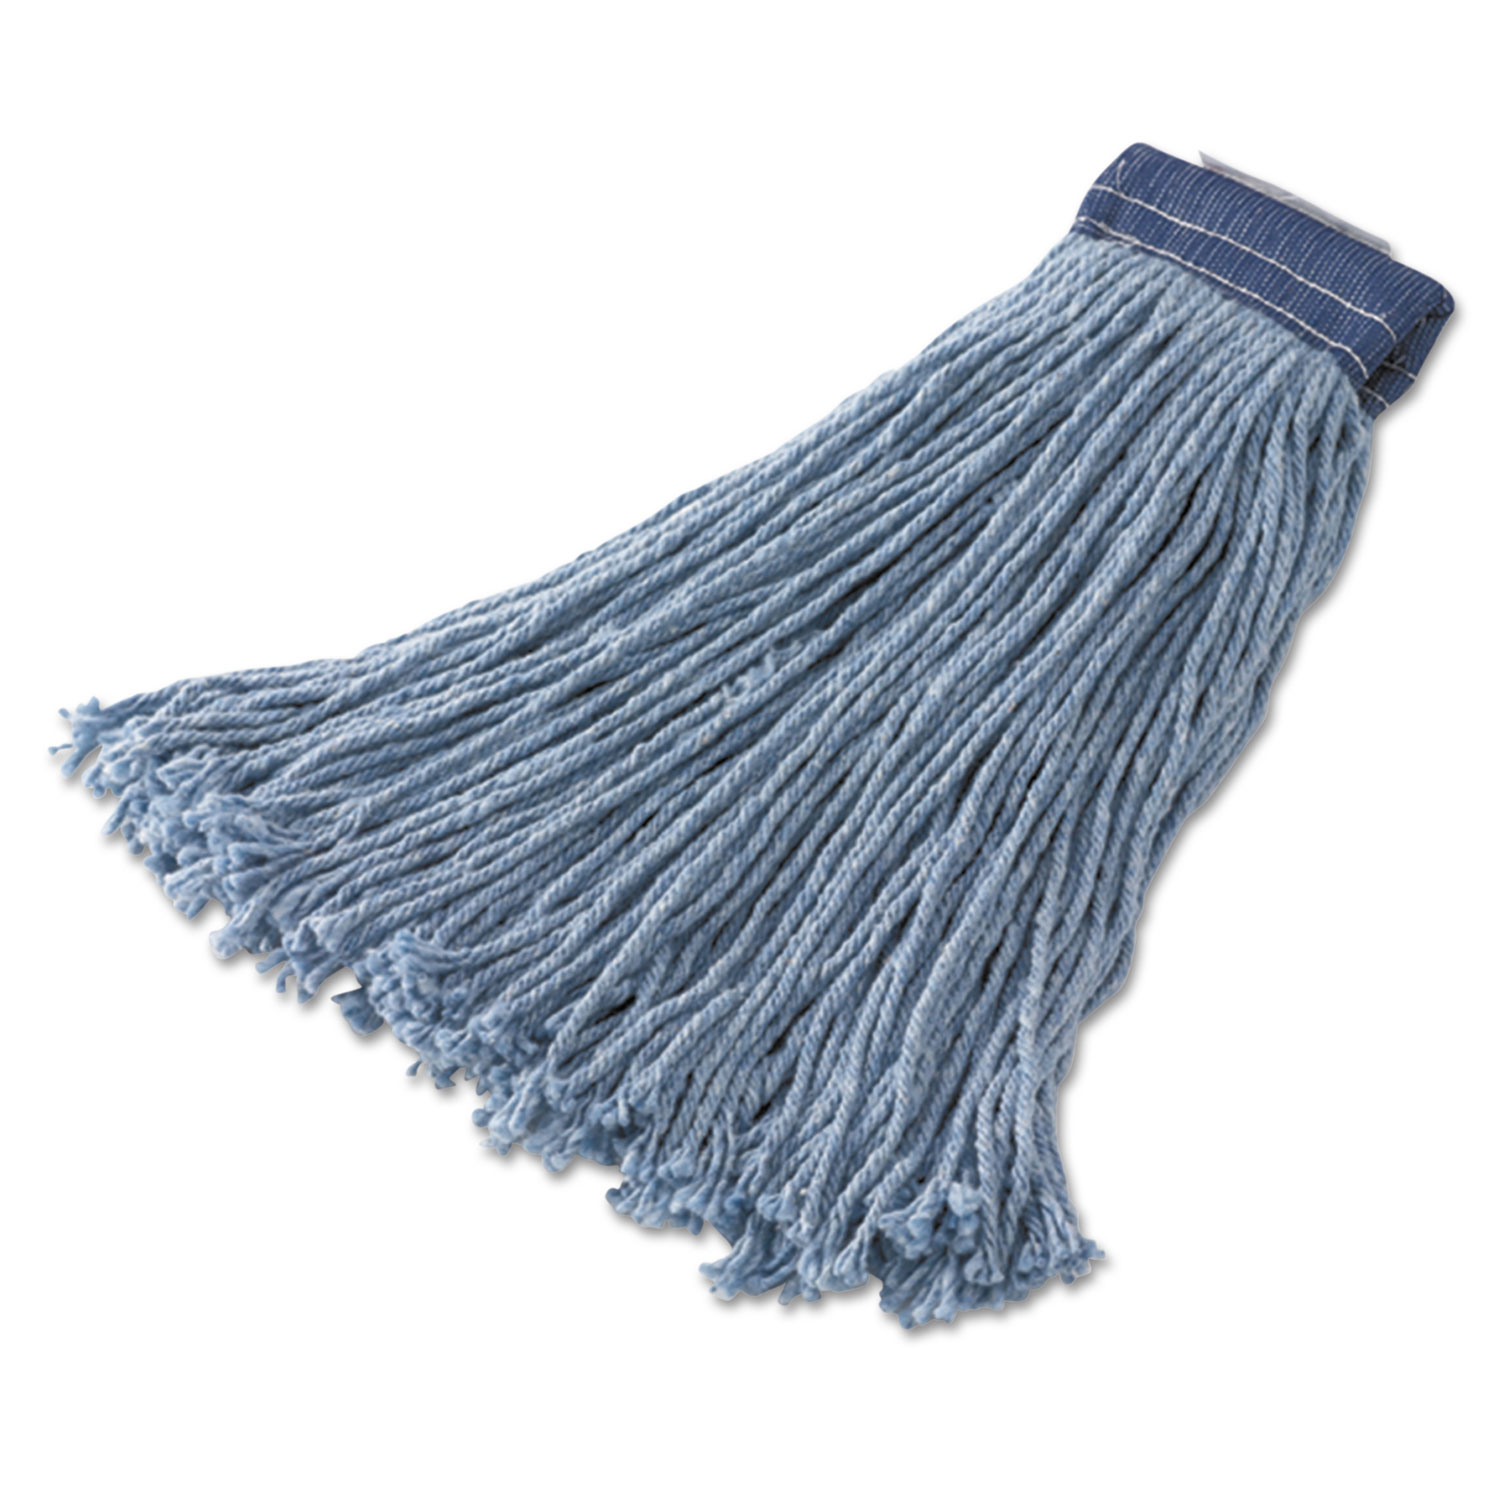  Rubbermaid Commercial FGF55800BL00 Non-Launderable Cotton/Synth Cut-End Mop Heads, Ctn/Syn, 24 Oz, BE, 12/CT (RCPF558BLU) 